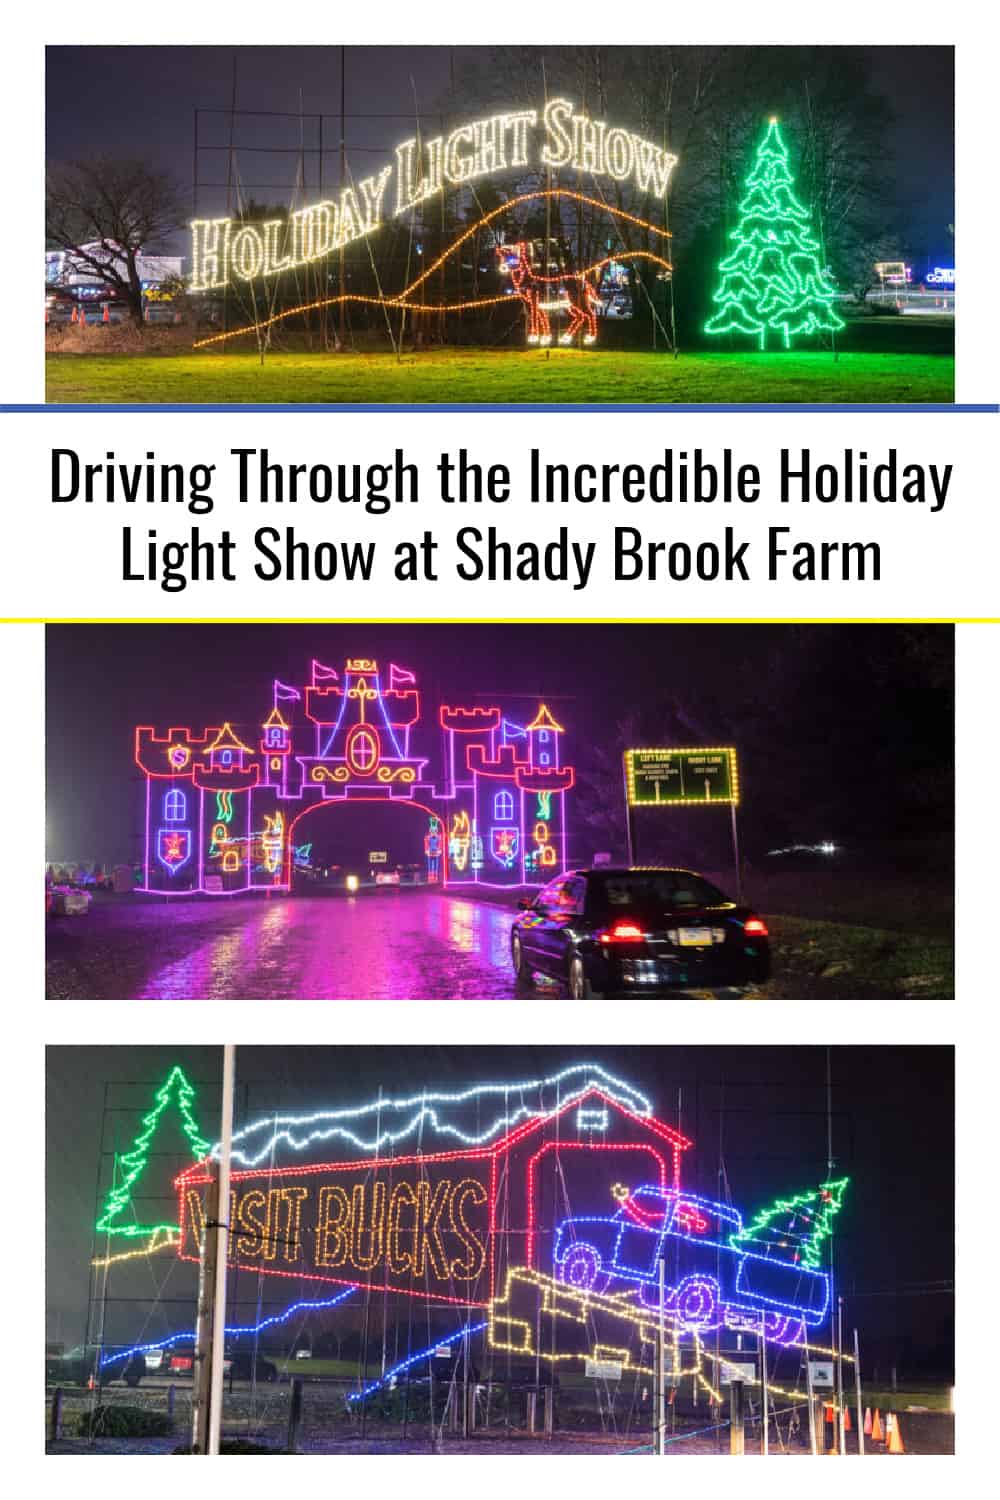 Driving Through the Incredible Holiday Light Show at Shady Brook Farm ...